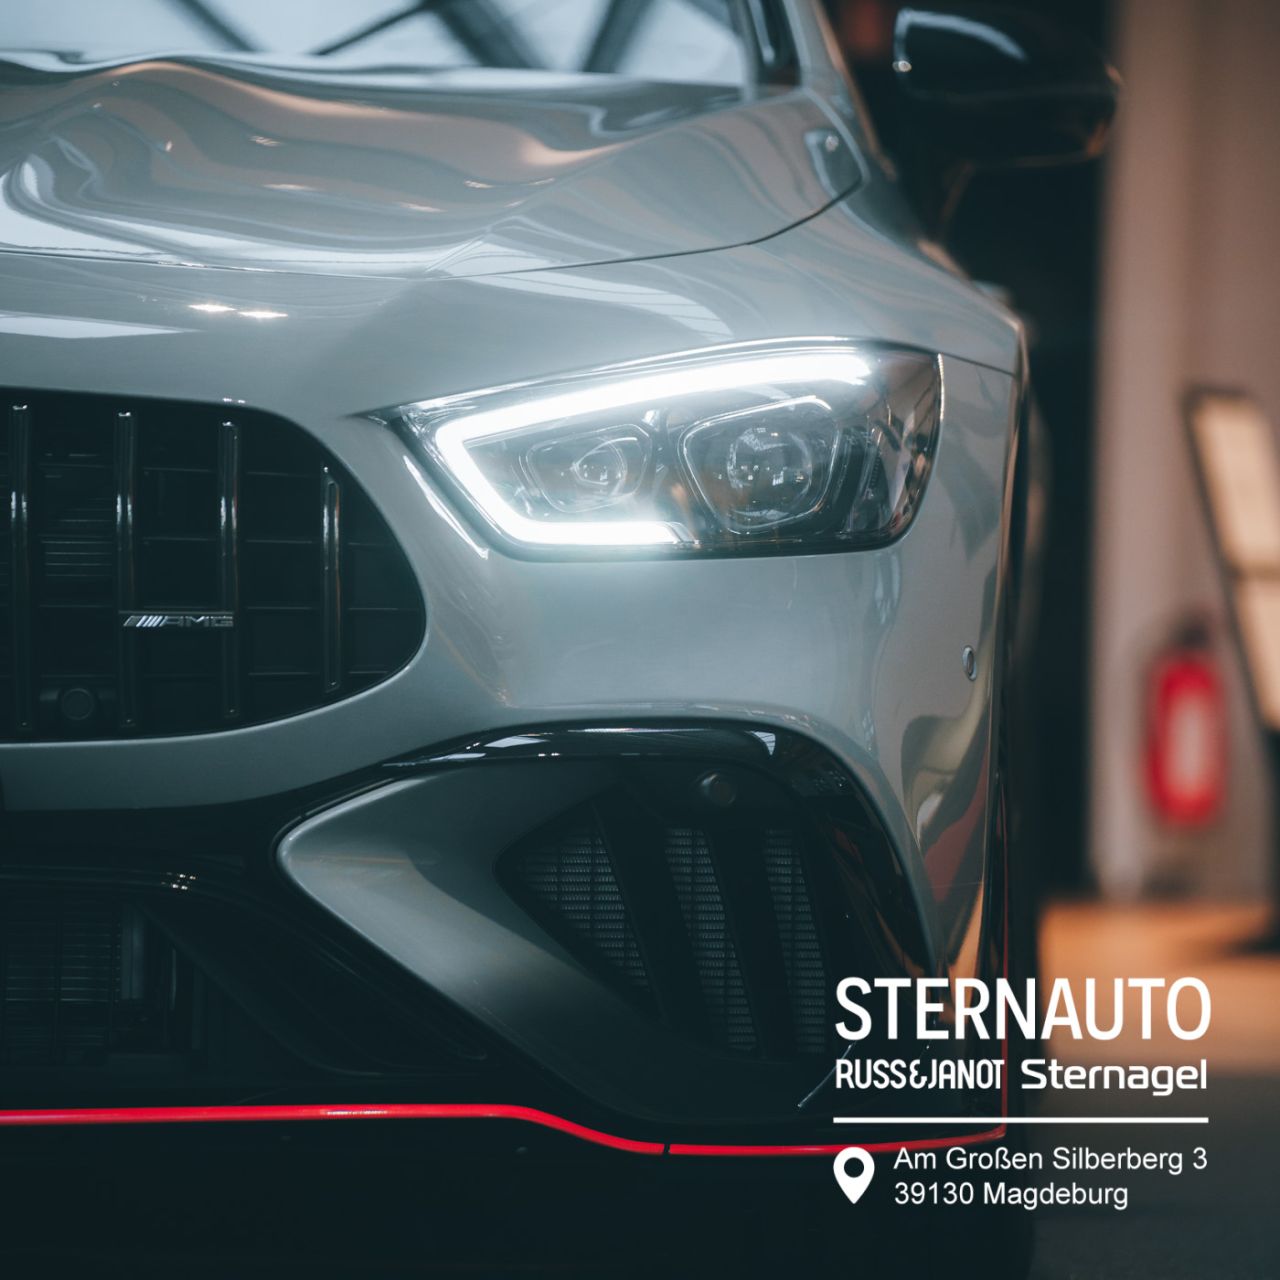 Showroom Highlight: STERNAUTO Group is represented in six federal states. Here’s the facility in Magdeburg, Saxony-Anhalt.